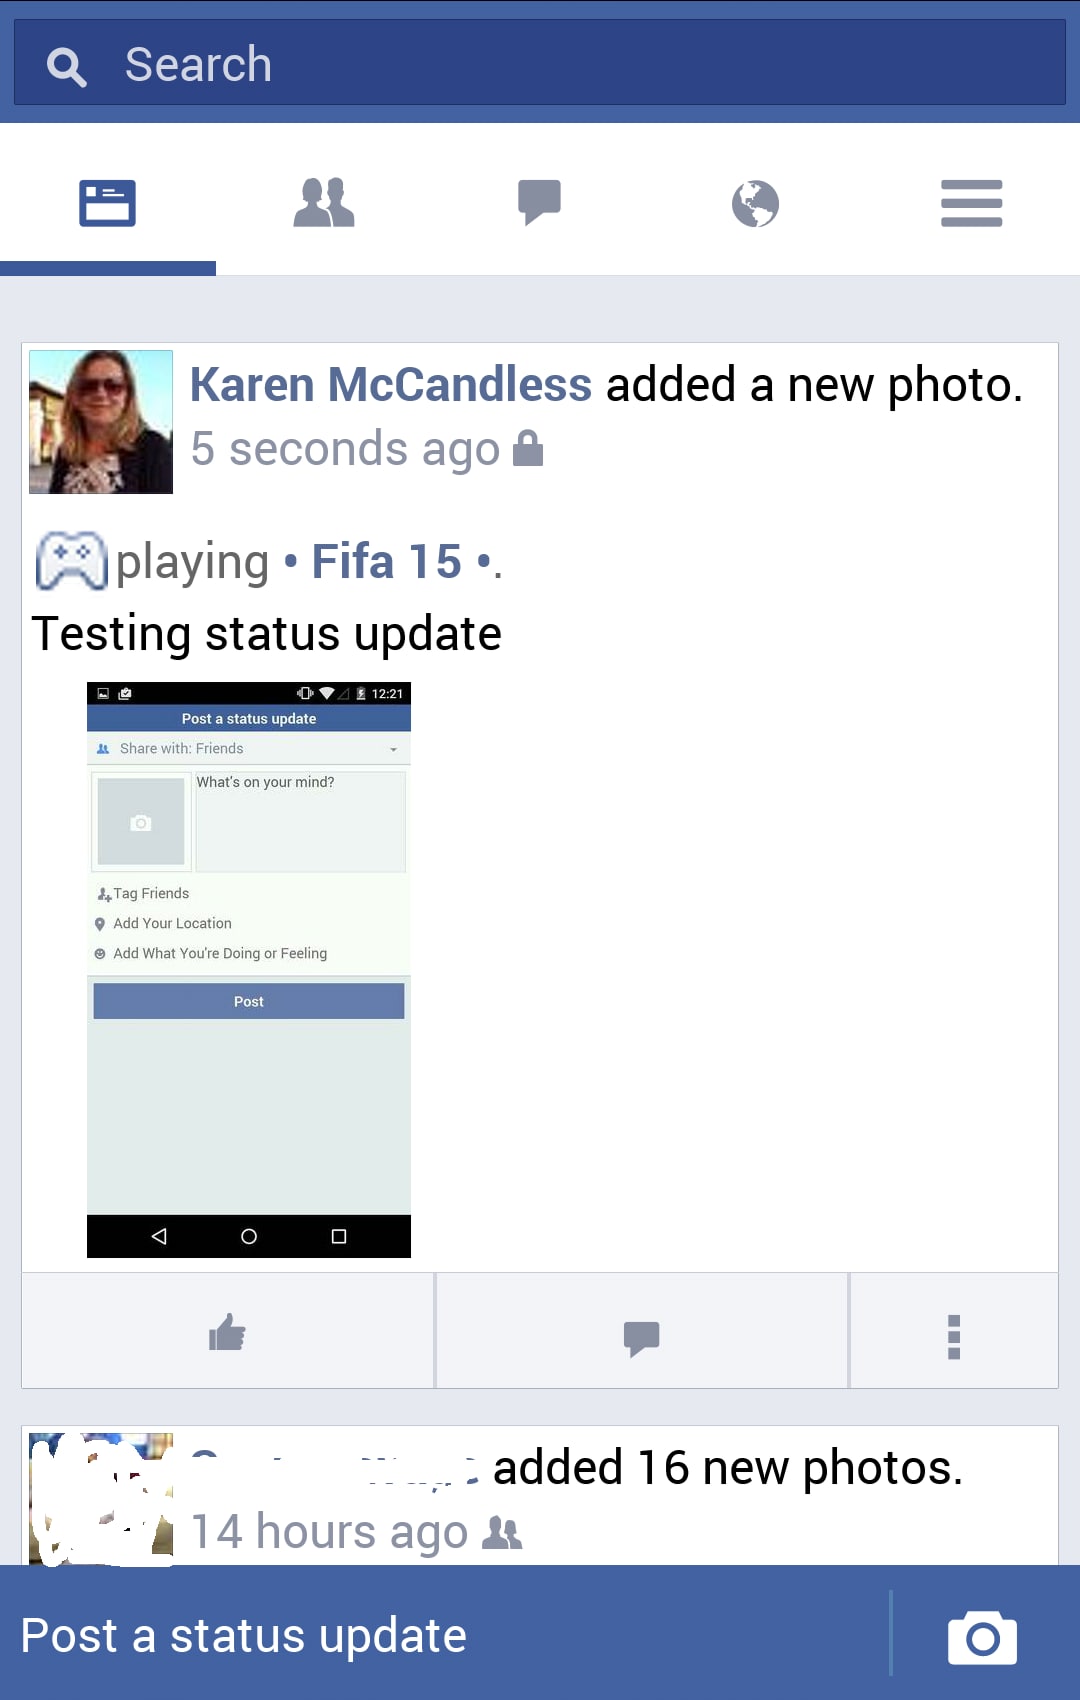 Facebook Lite for Android - Download